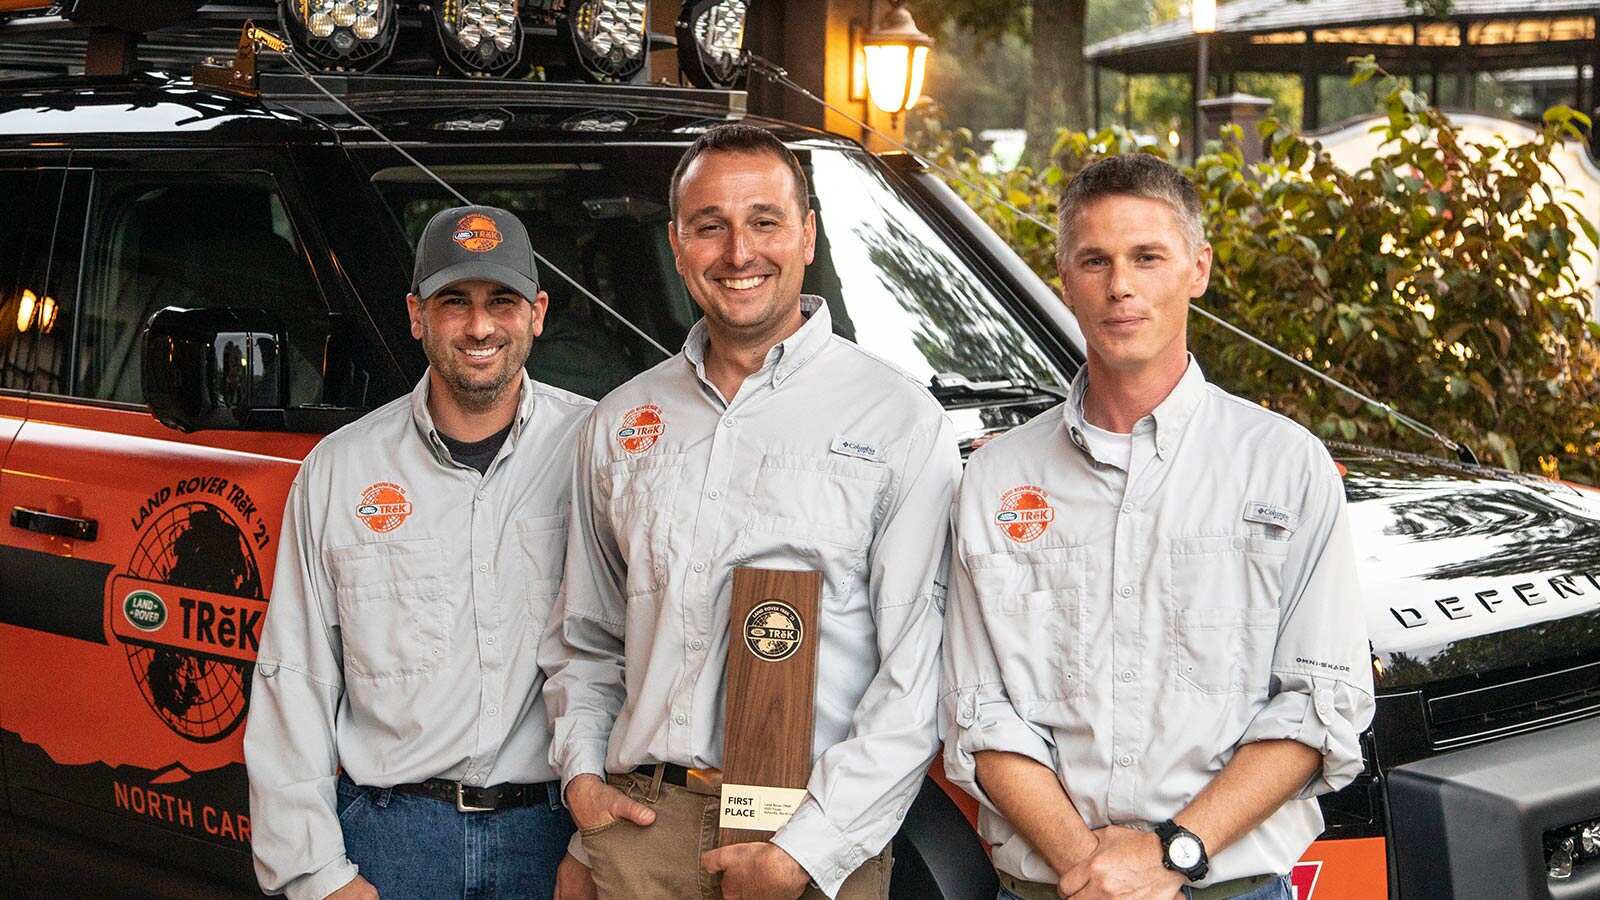 Land Rover TReK Off-Road Competition team from Baton Rouge, Louisiana.